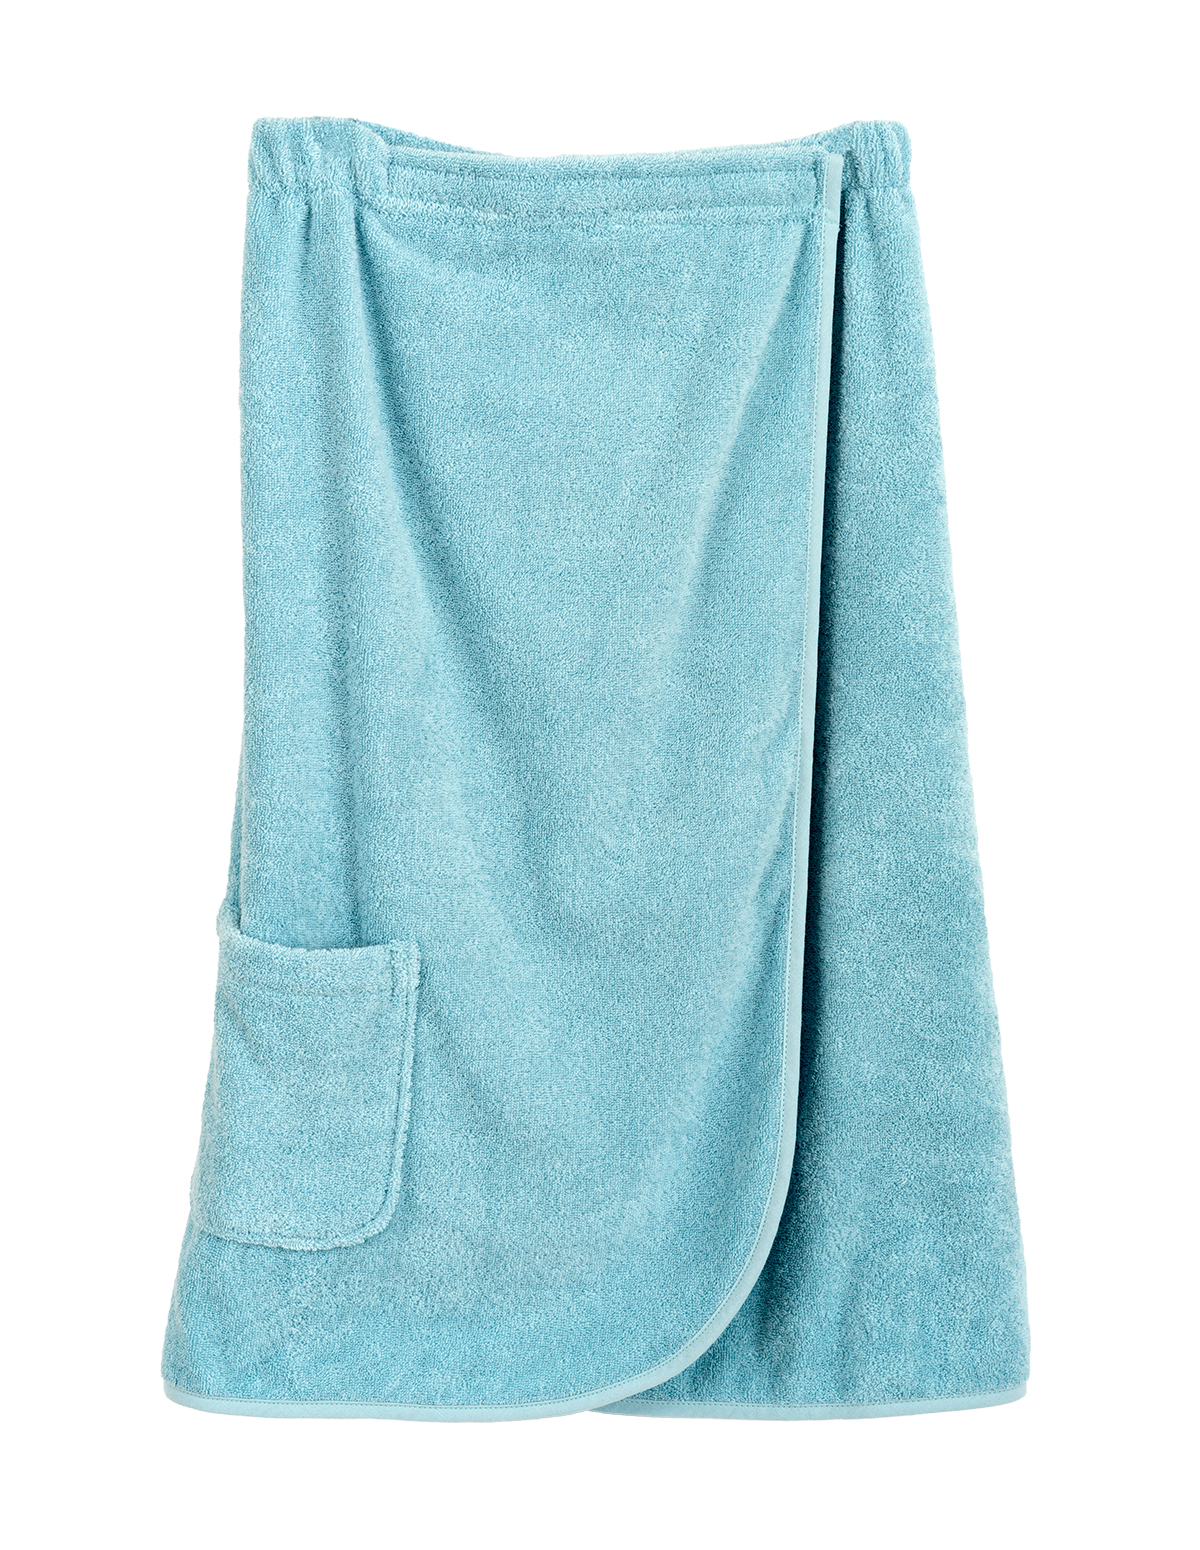 TowelSelections Women S Wrap Adjustable Cotton Terry Spa Shower Bath Gym Cover Up Small Blue